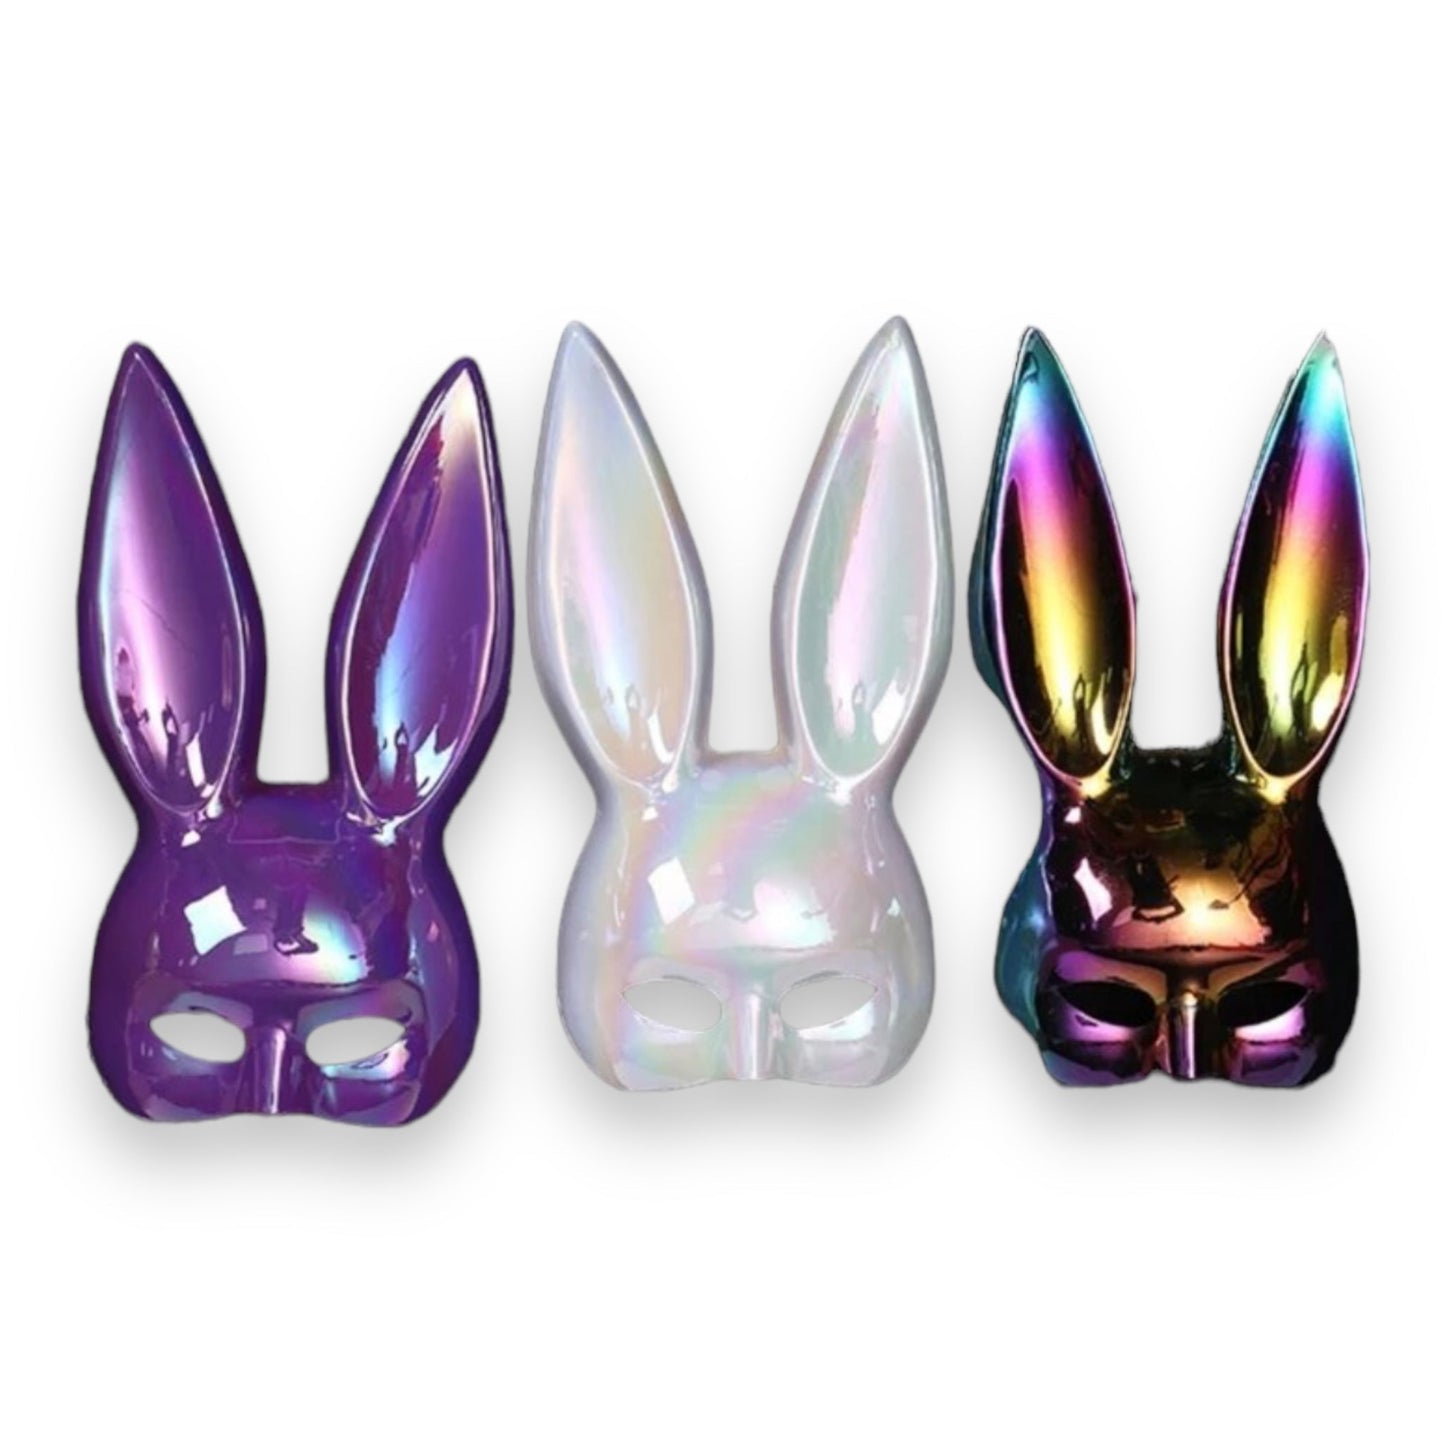 Rabbit Mask - Available in 5 Colors - Includes Colorful Box